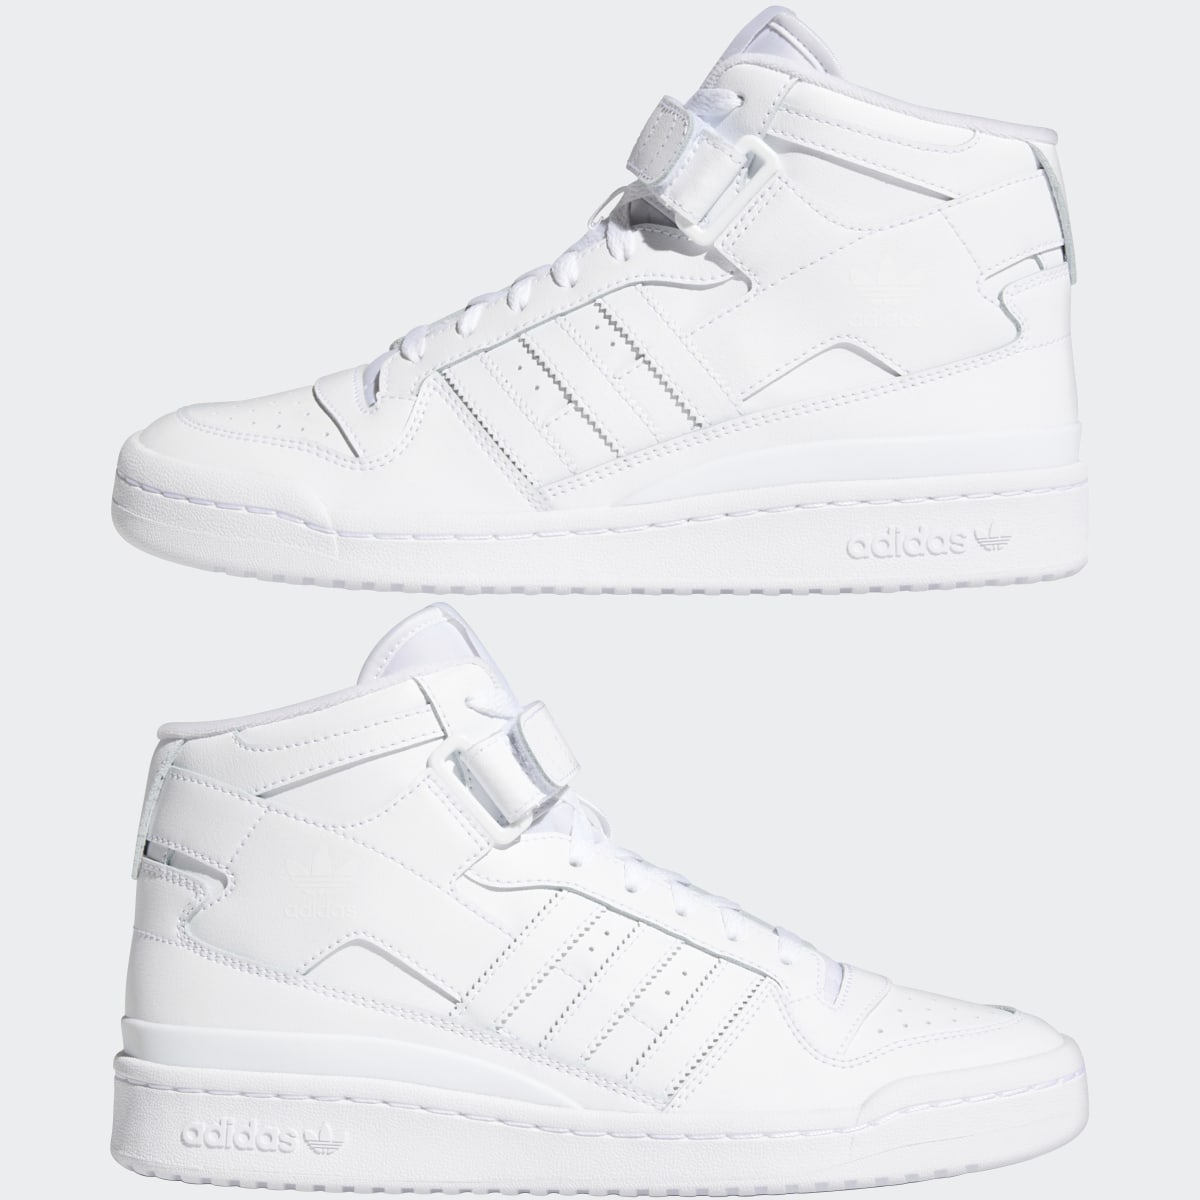 Adidas Forum Mid Shoes. 9